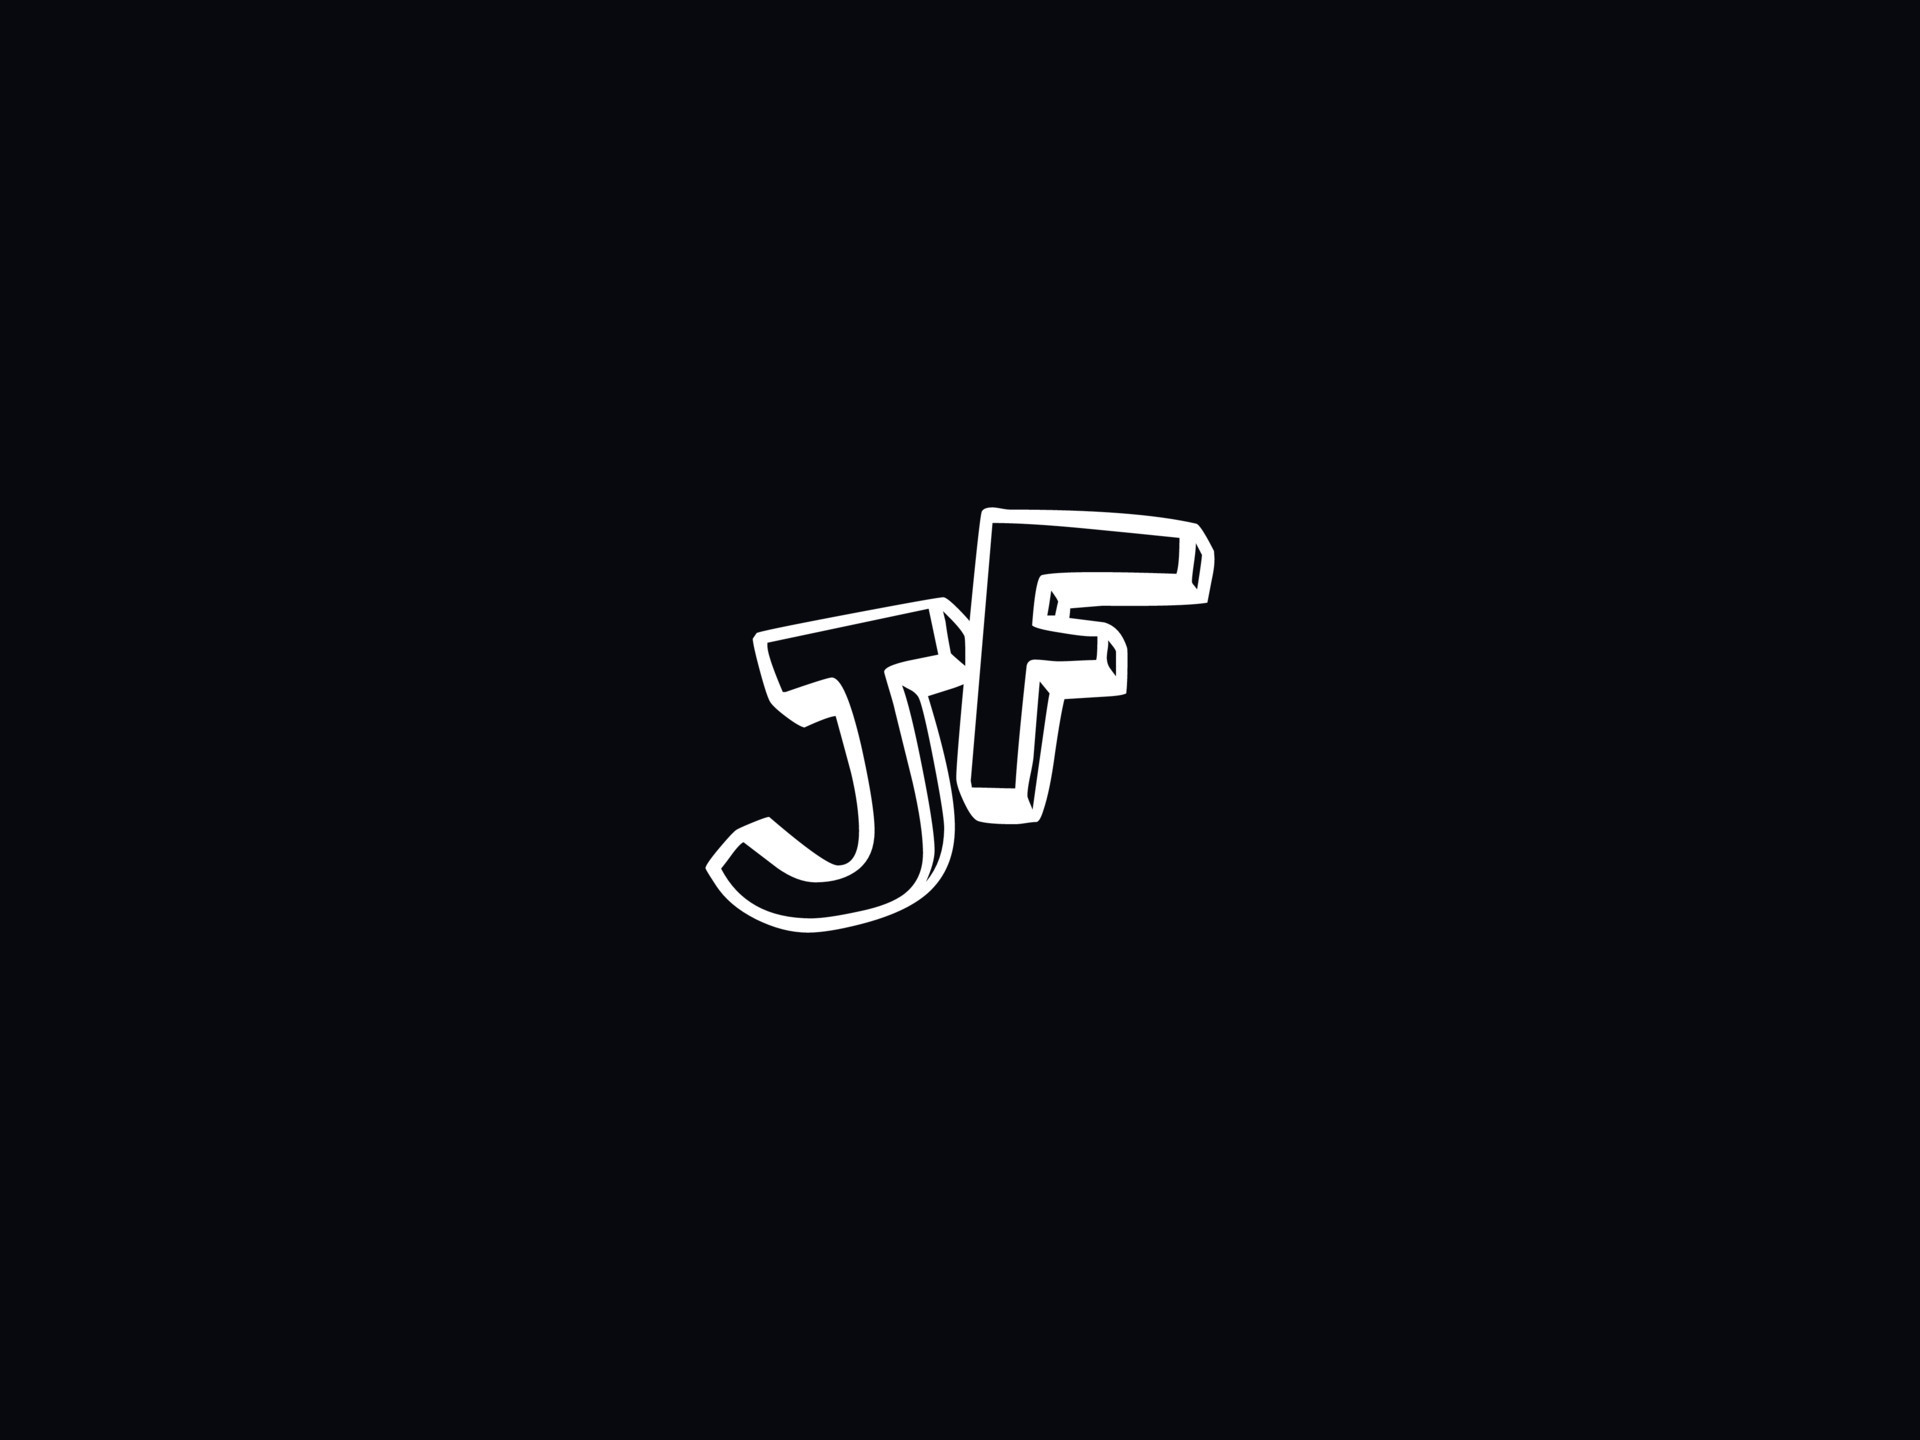 JF Wallpaper | 40% Off - Free Shipping (Samples)